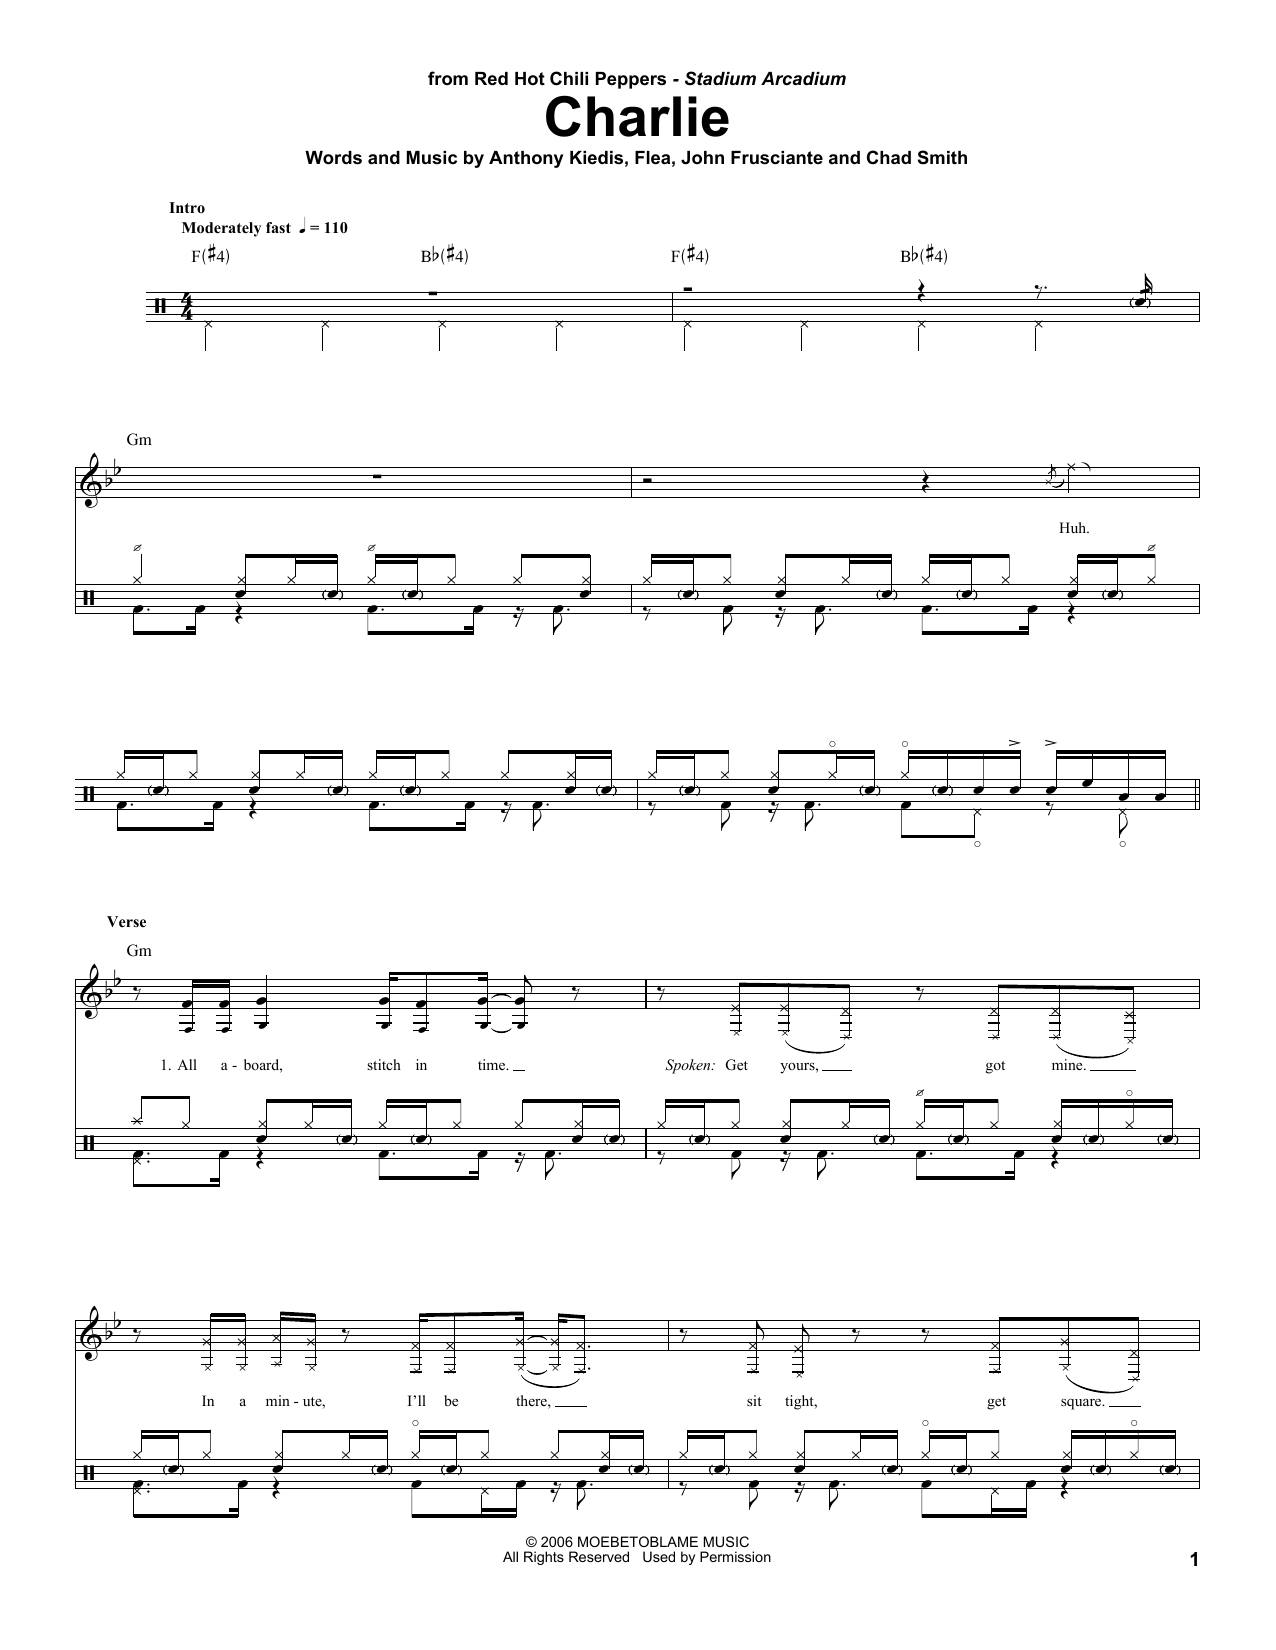 Download Red Hot Chili Peppers Charlie Sheet Music